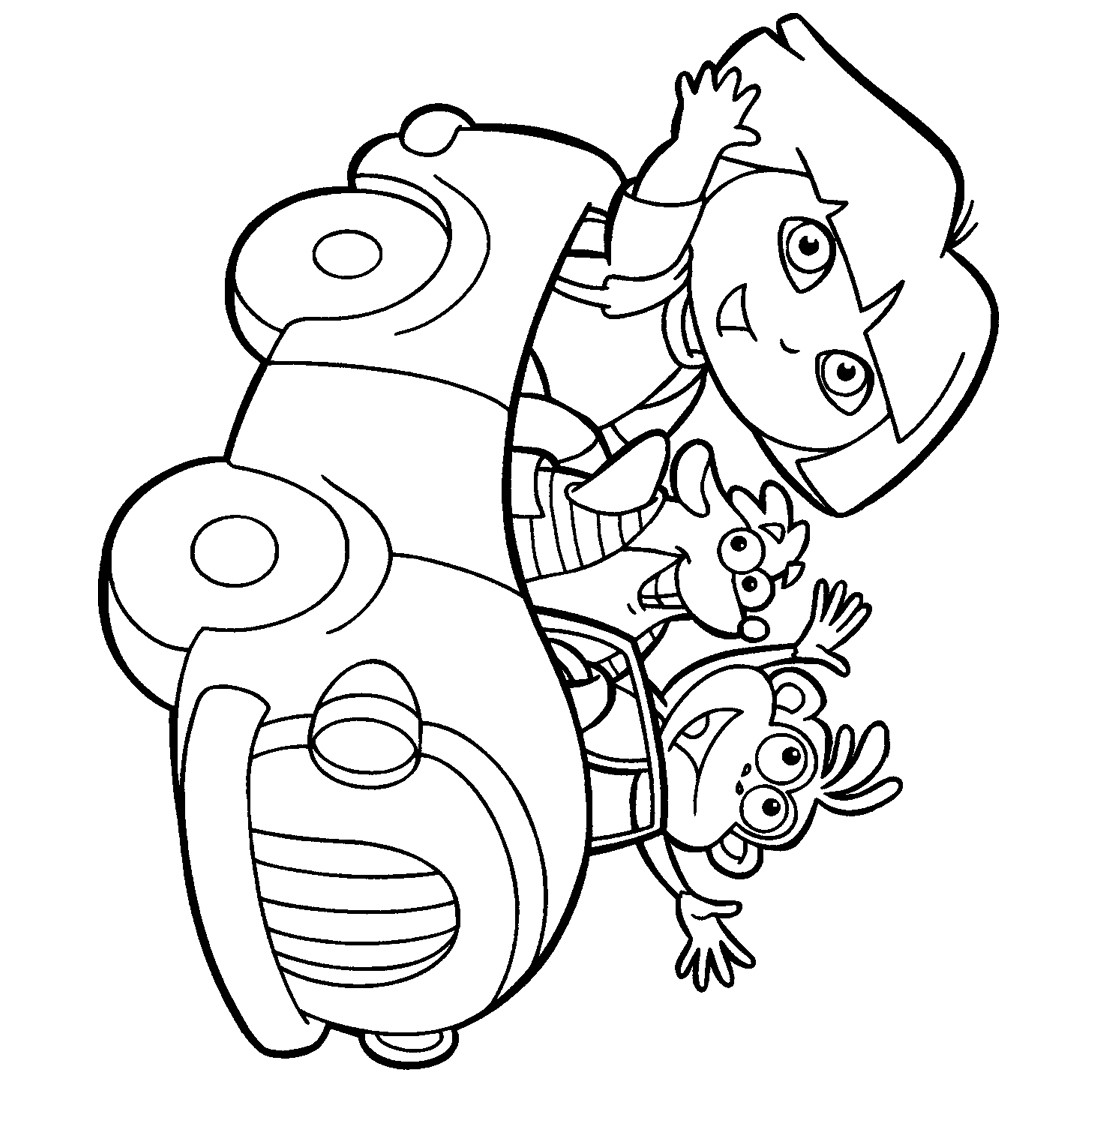 Toddler Coloring Pages Printable
 Printable coloring pages for kids